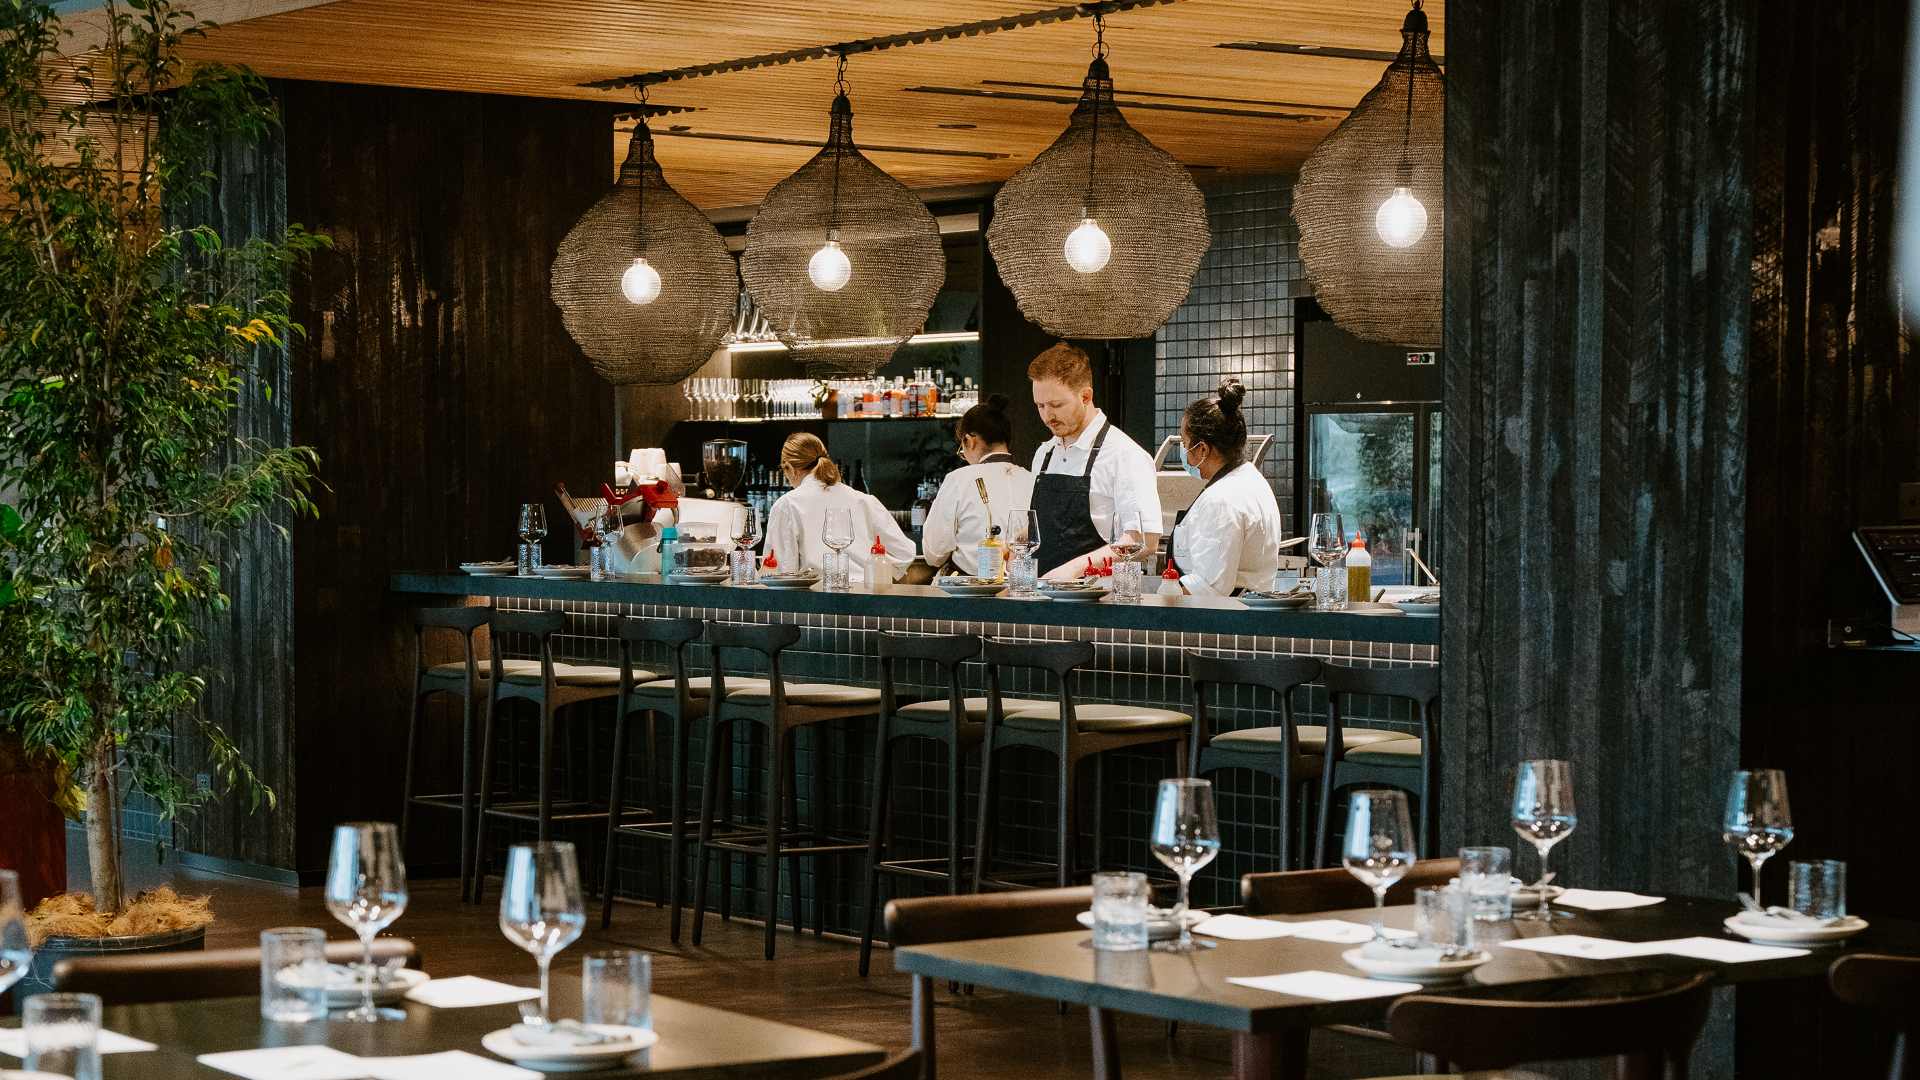 Victoria by Famrer's Daughter - one of the very best restaurants in Melbourne.